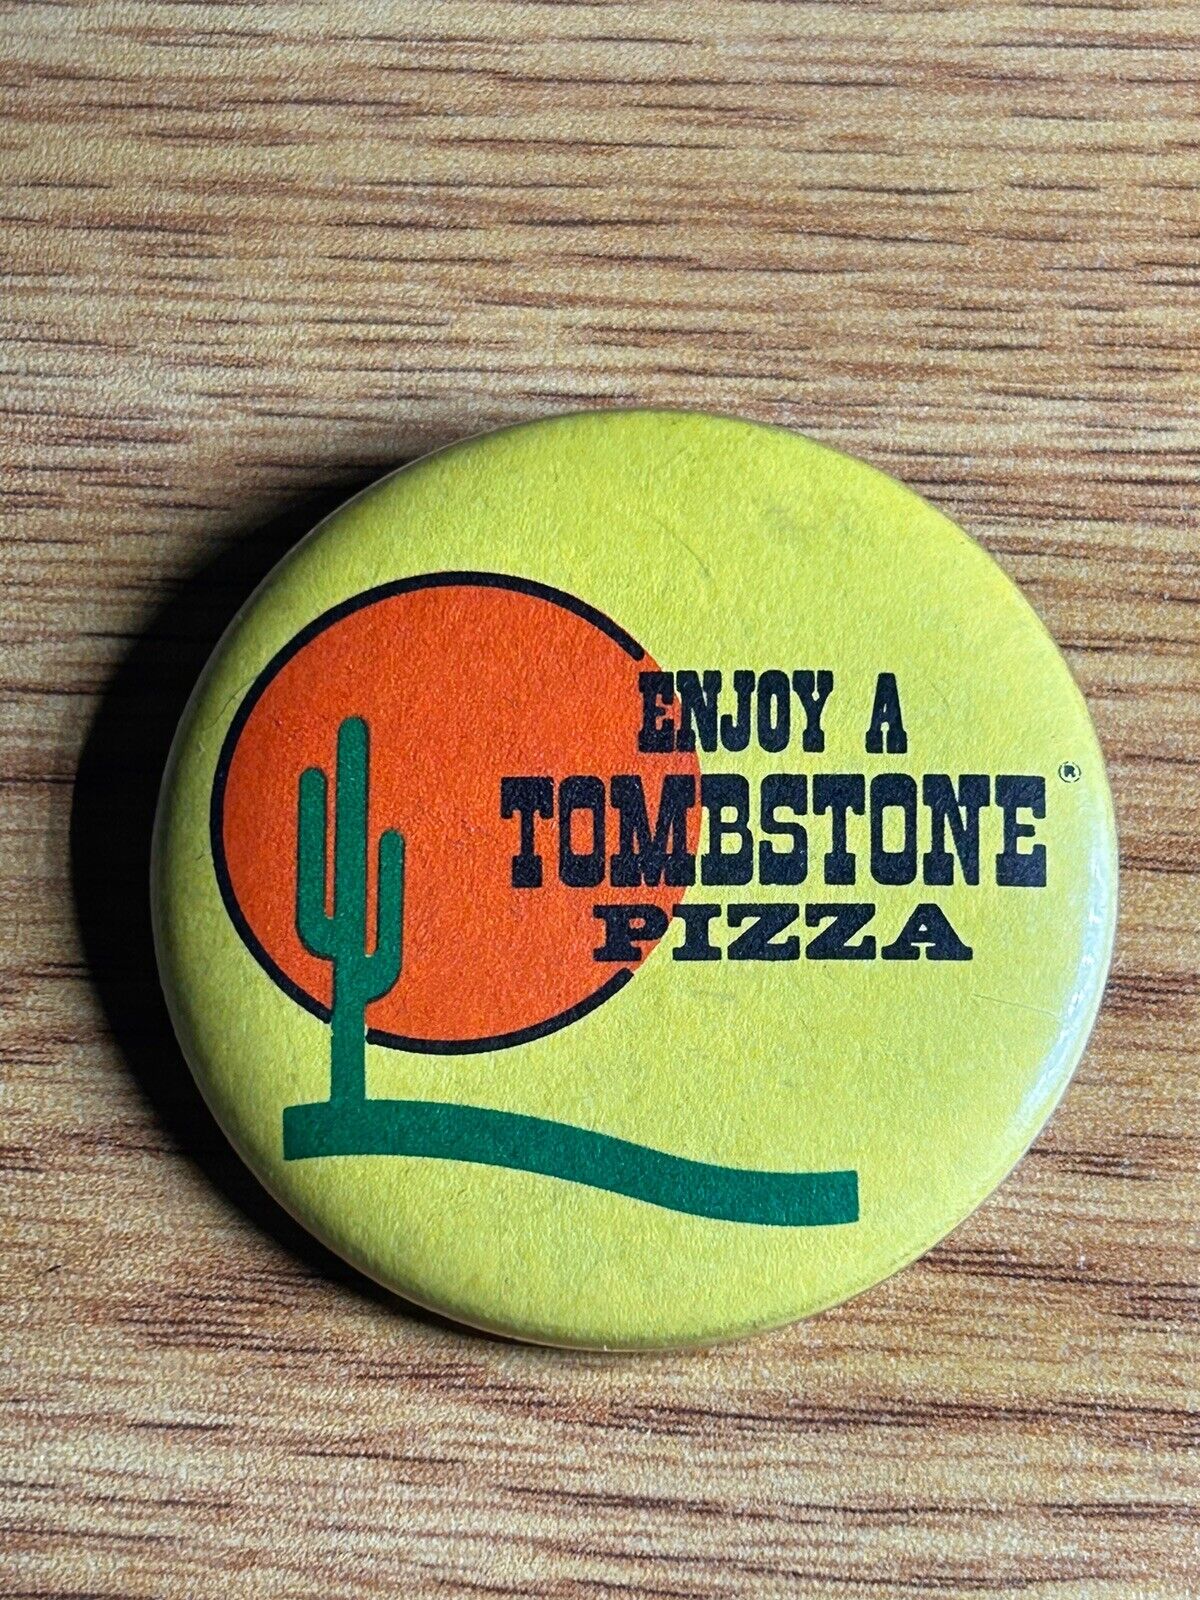 Vintage Tombstone Frozen Pizza  Advertising Button “ENJOY A TOMBSTONE PIZZA” Pin